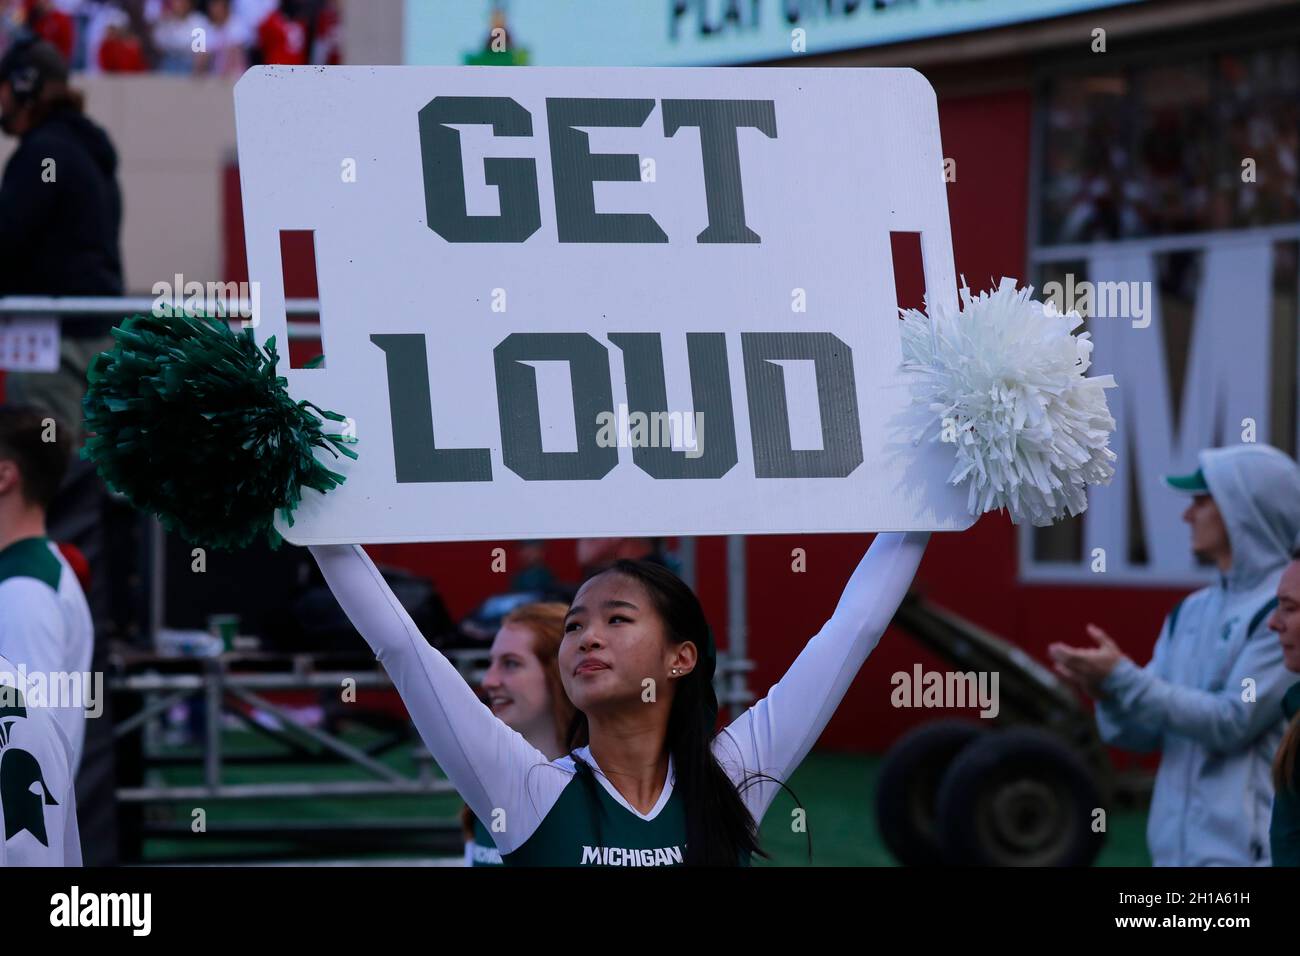 BLOOMINGTON, UNITED STATES - 2021/10/16: Michigan State cheerleaders cheer for the Spartans during an NCAA game against Indiana University on October 16, 2021 at Memorial Stadium in Bloomington, Ind. IU lost to Michigan State 20-15. Stock Photo